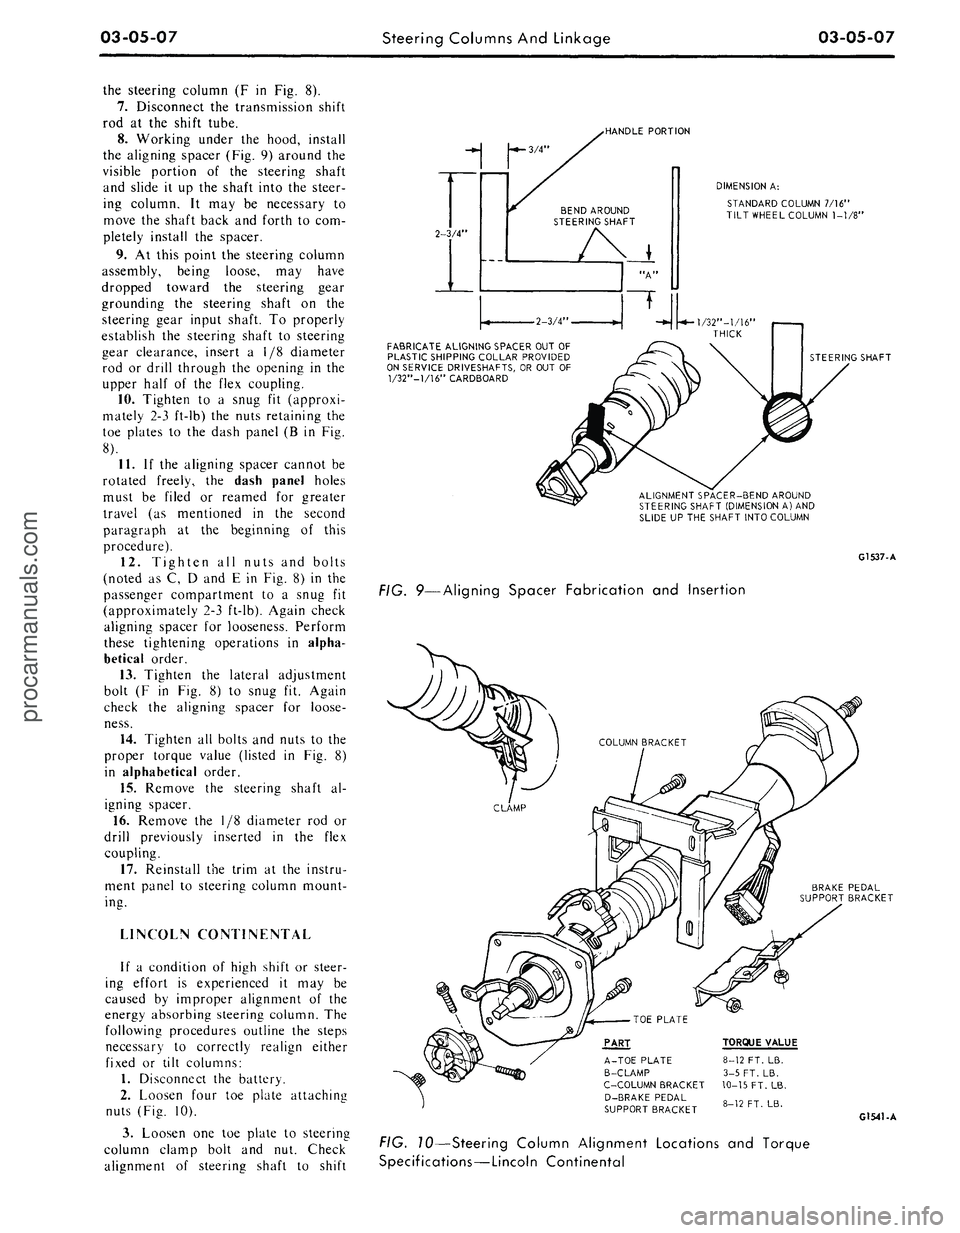 FORD MUSTANG 1969  Volume One Chassis 
03-05-07

Steering Columns And Linkage 
03-05-07

the steering column
 (F in Fig. 8).

7.
 Disconnect
 the
 transmission shift

rod
 at the
 shift tube.

8. Working under
 the
 hood, install

the ali